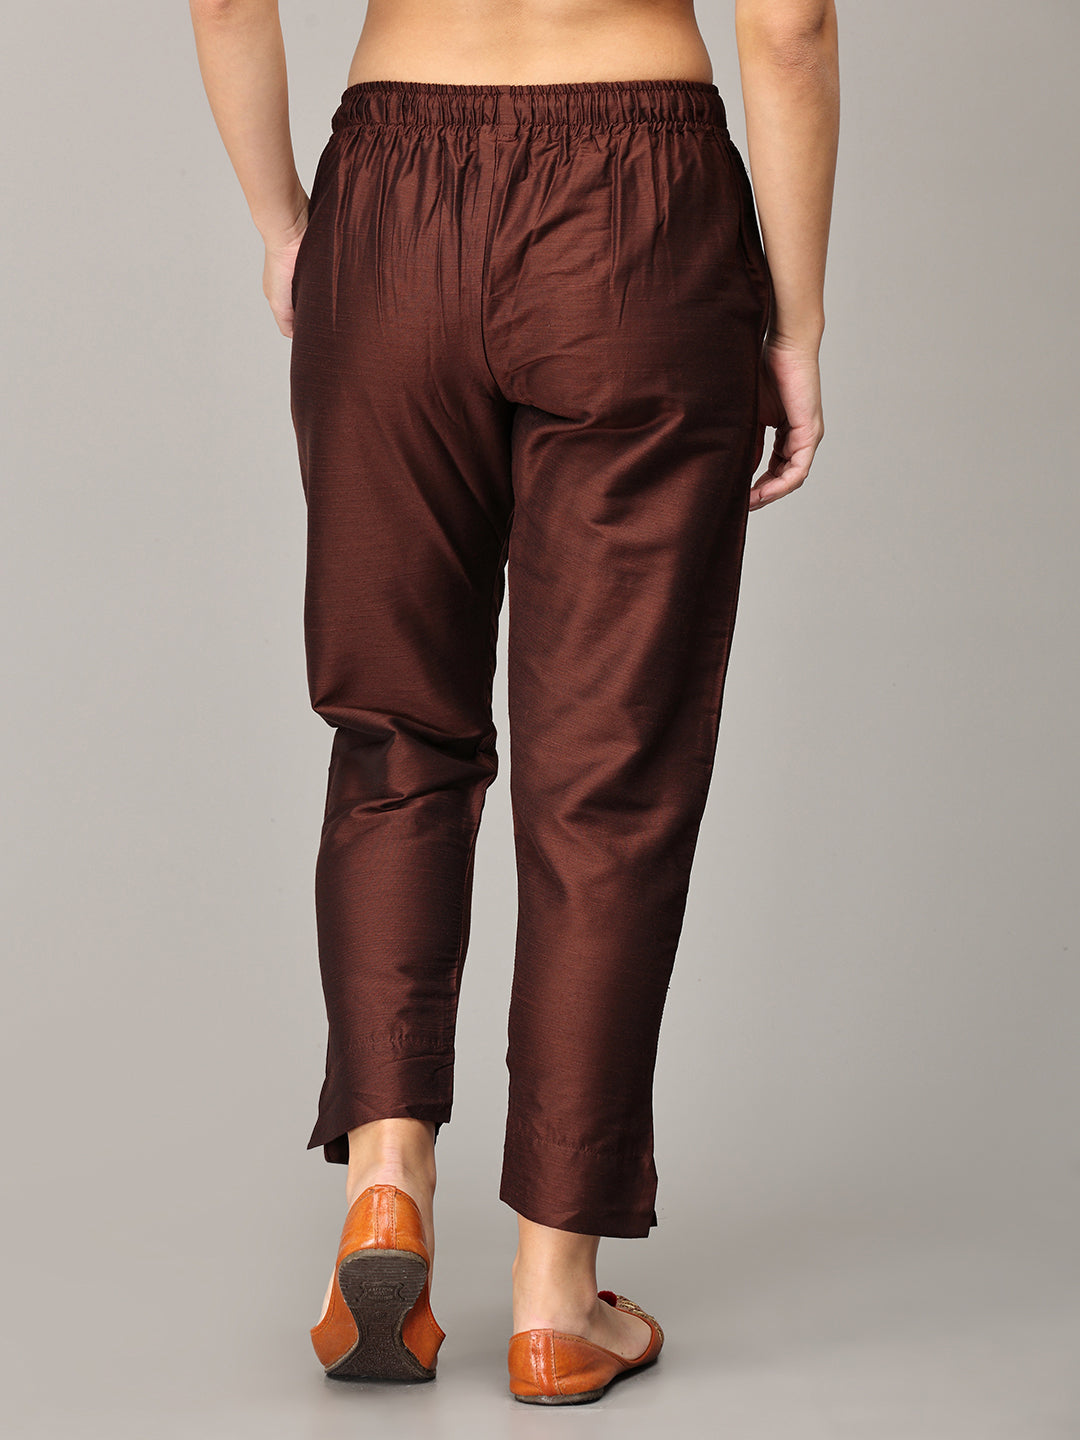 QUYUON Wide Leg Linen Pants for Women Summer High Waisted Cotton Linen Long  Lounge Pants with Pockets Elastic Waist Pull on Pants Casual Loose Straight  Wide Leg Pants Trousers Brown - Walmart.com